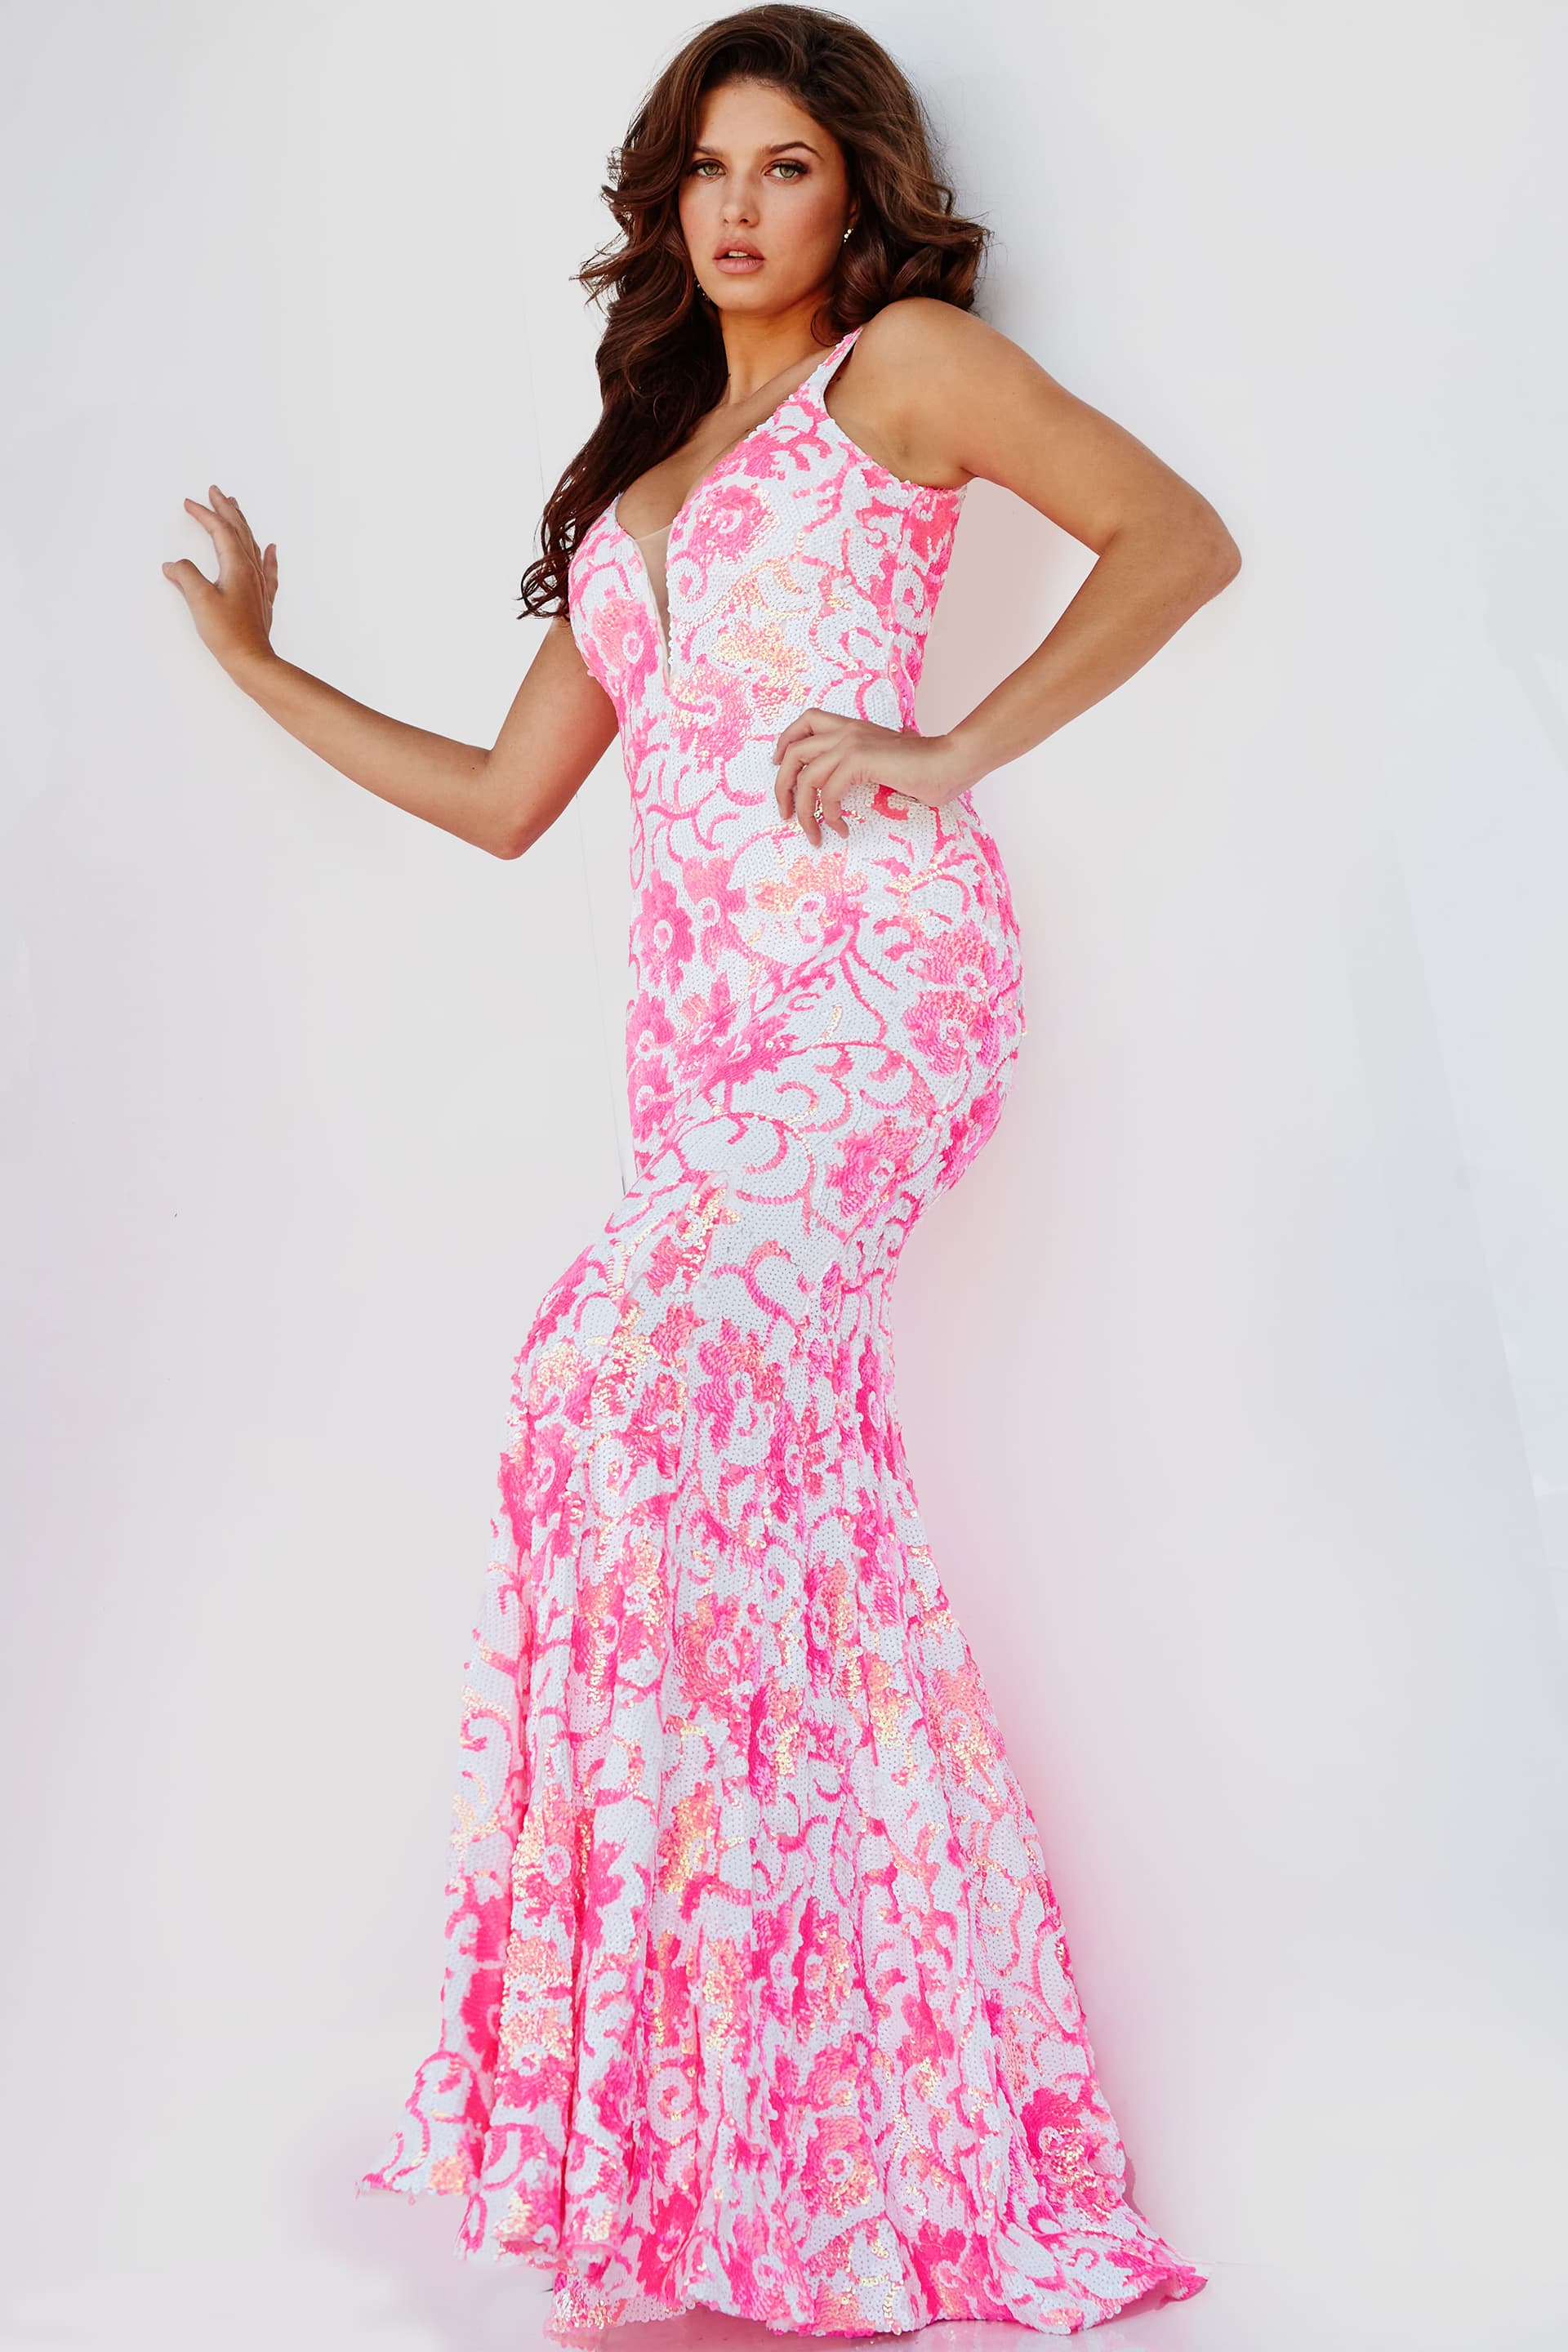 Jovani 08527 is a stunning formal prom & pageant dress. Featuring a floral design in sequin accents. Plunging V neckline. Lush sweeping train & Open midrise back. Great Gown for any formal event! This gown reveals a mermaid silhouette lavishly studded with floral sequin embellishment throughout finished with a sweep train.   Available Sizes: 00,0,2,4,6,8,10,12,14,16,18,20,22,24  Available Colors:  IVORY/BLUE, IVORY/EMERALD, IVORY/HOT-PINK, IVORY/LIGHT ORANGE, IVORY/PURPLE, WHITE/AB